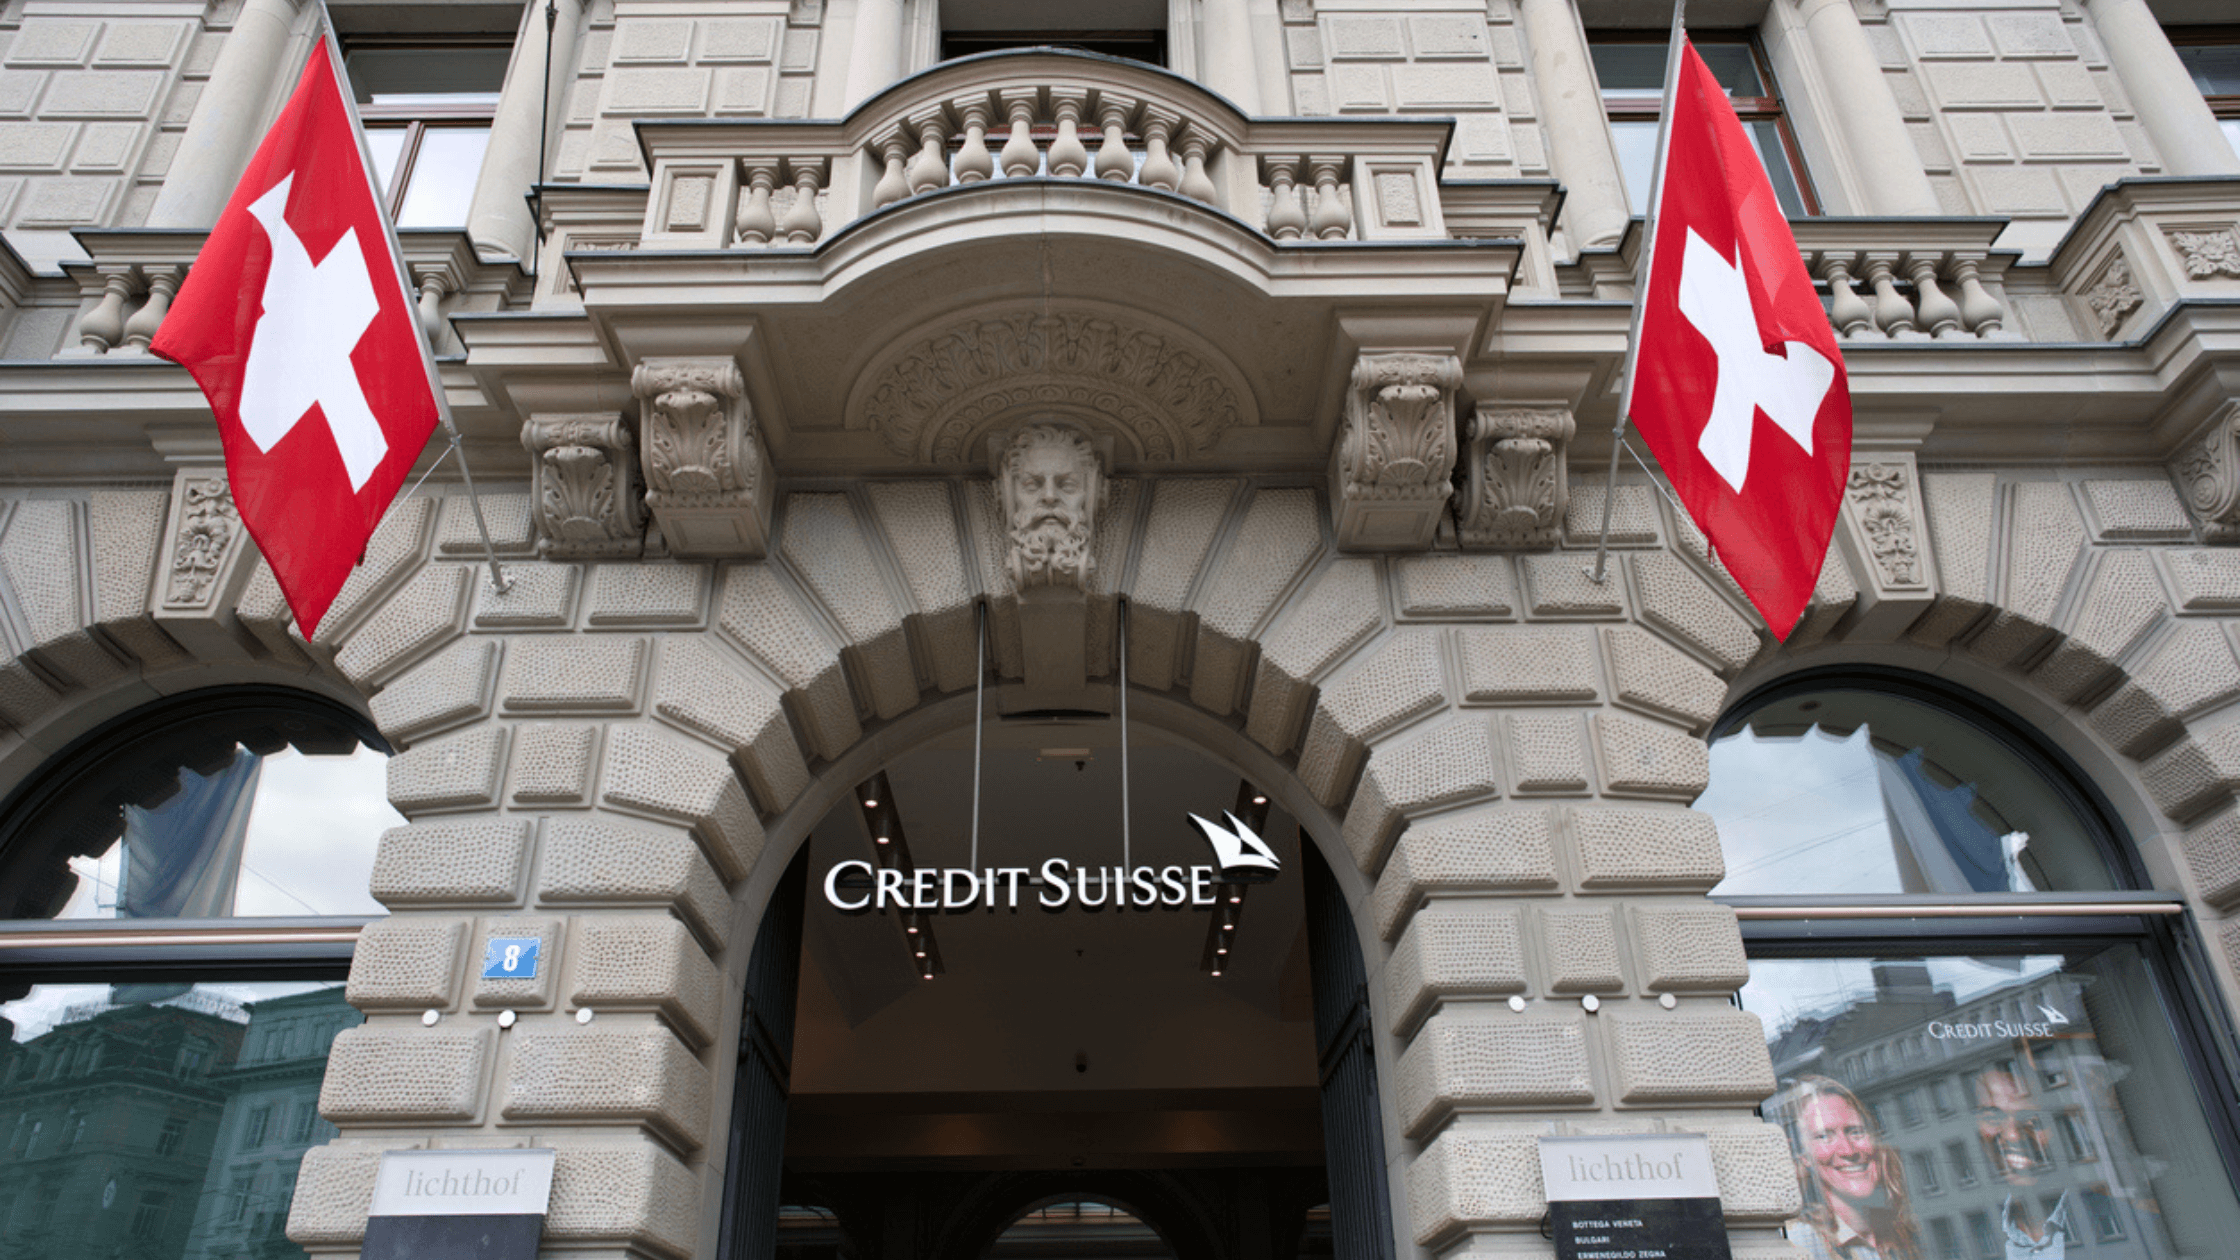 Credit Suisse Takeover: Why Singapore Bank Investors Should Care